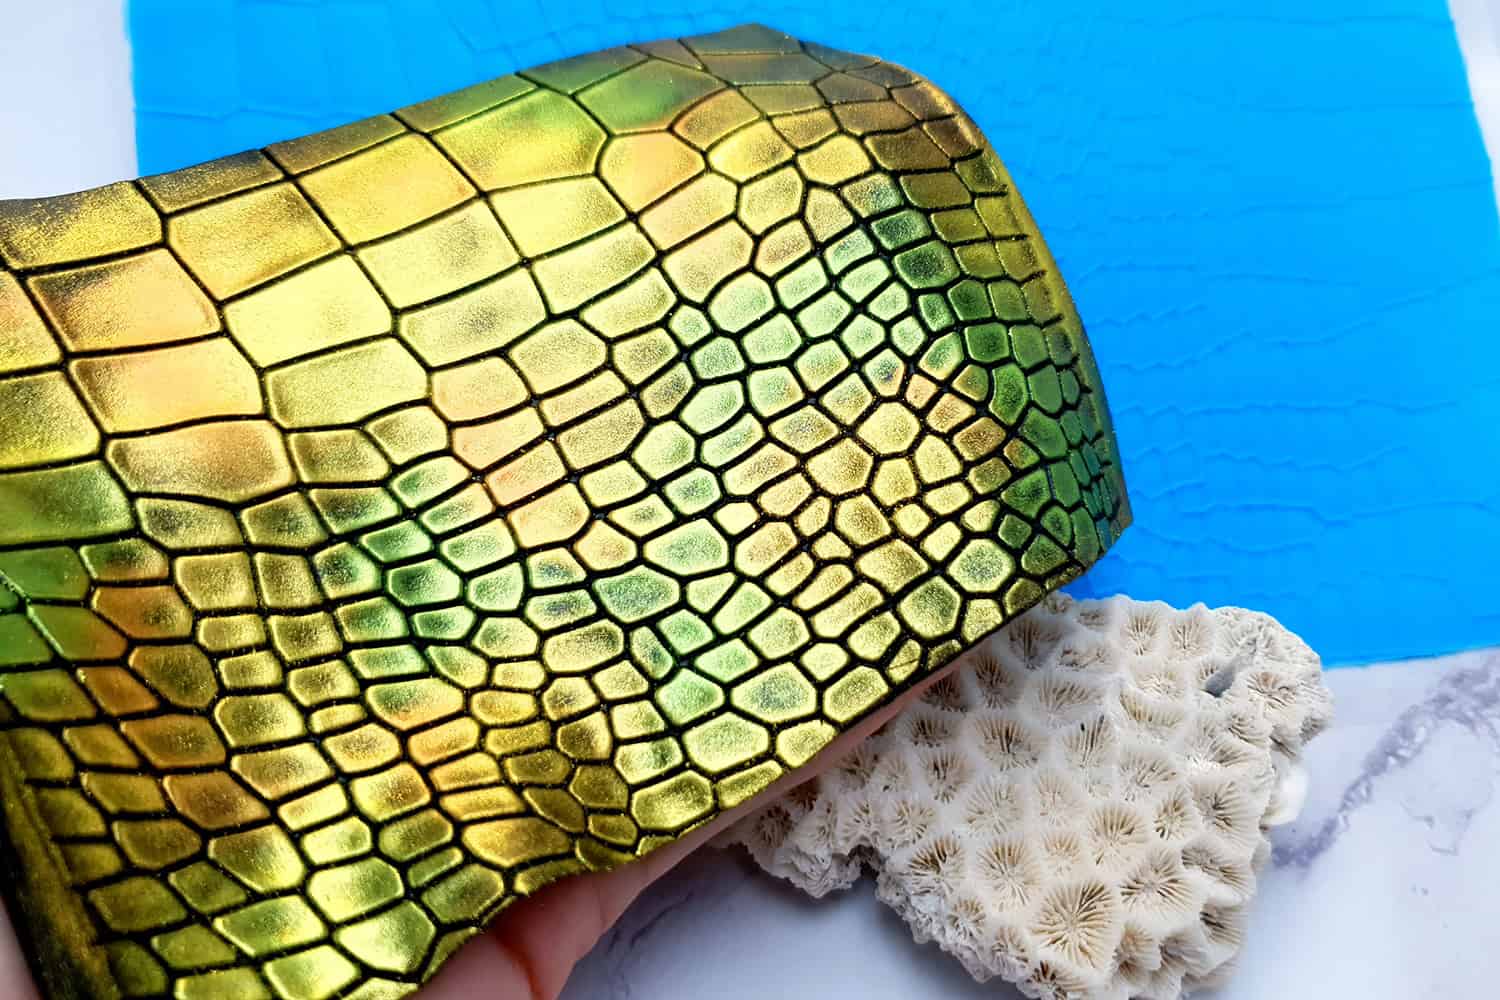 Super Thin Texture - Reptile Skin (OUT, 190x110) #23167